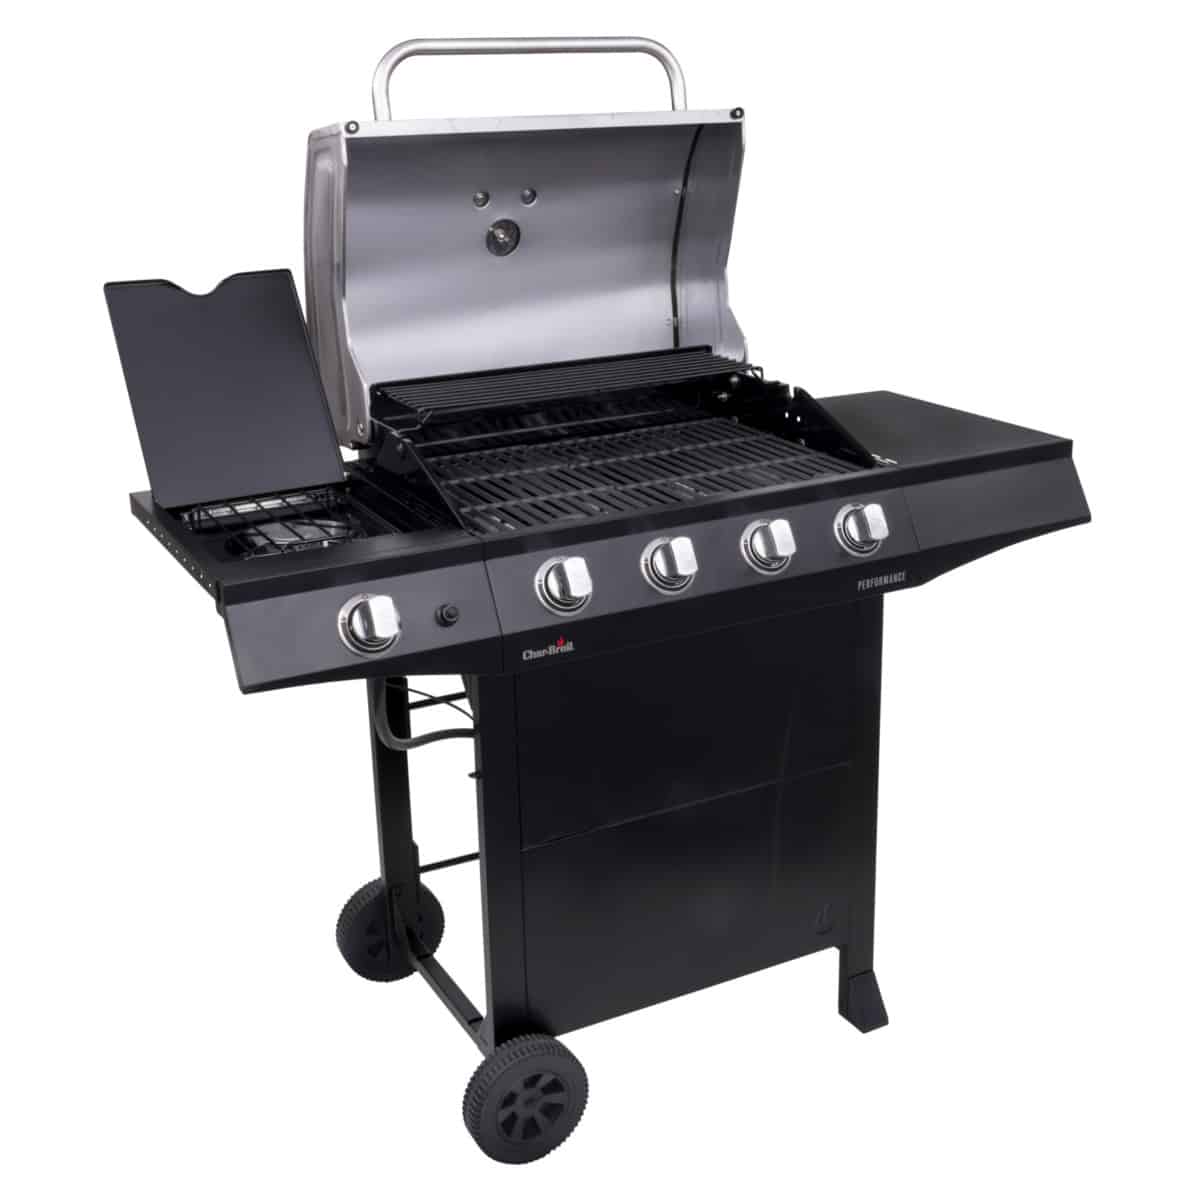 Char-Broil Performance 4-Burner gas grill, shot from the side with the lid open, isolated on white